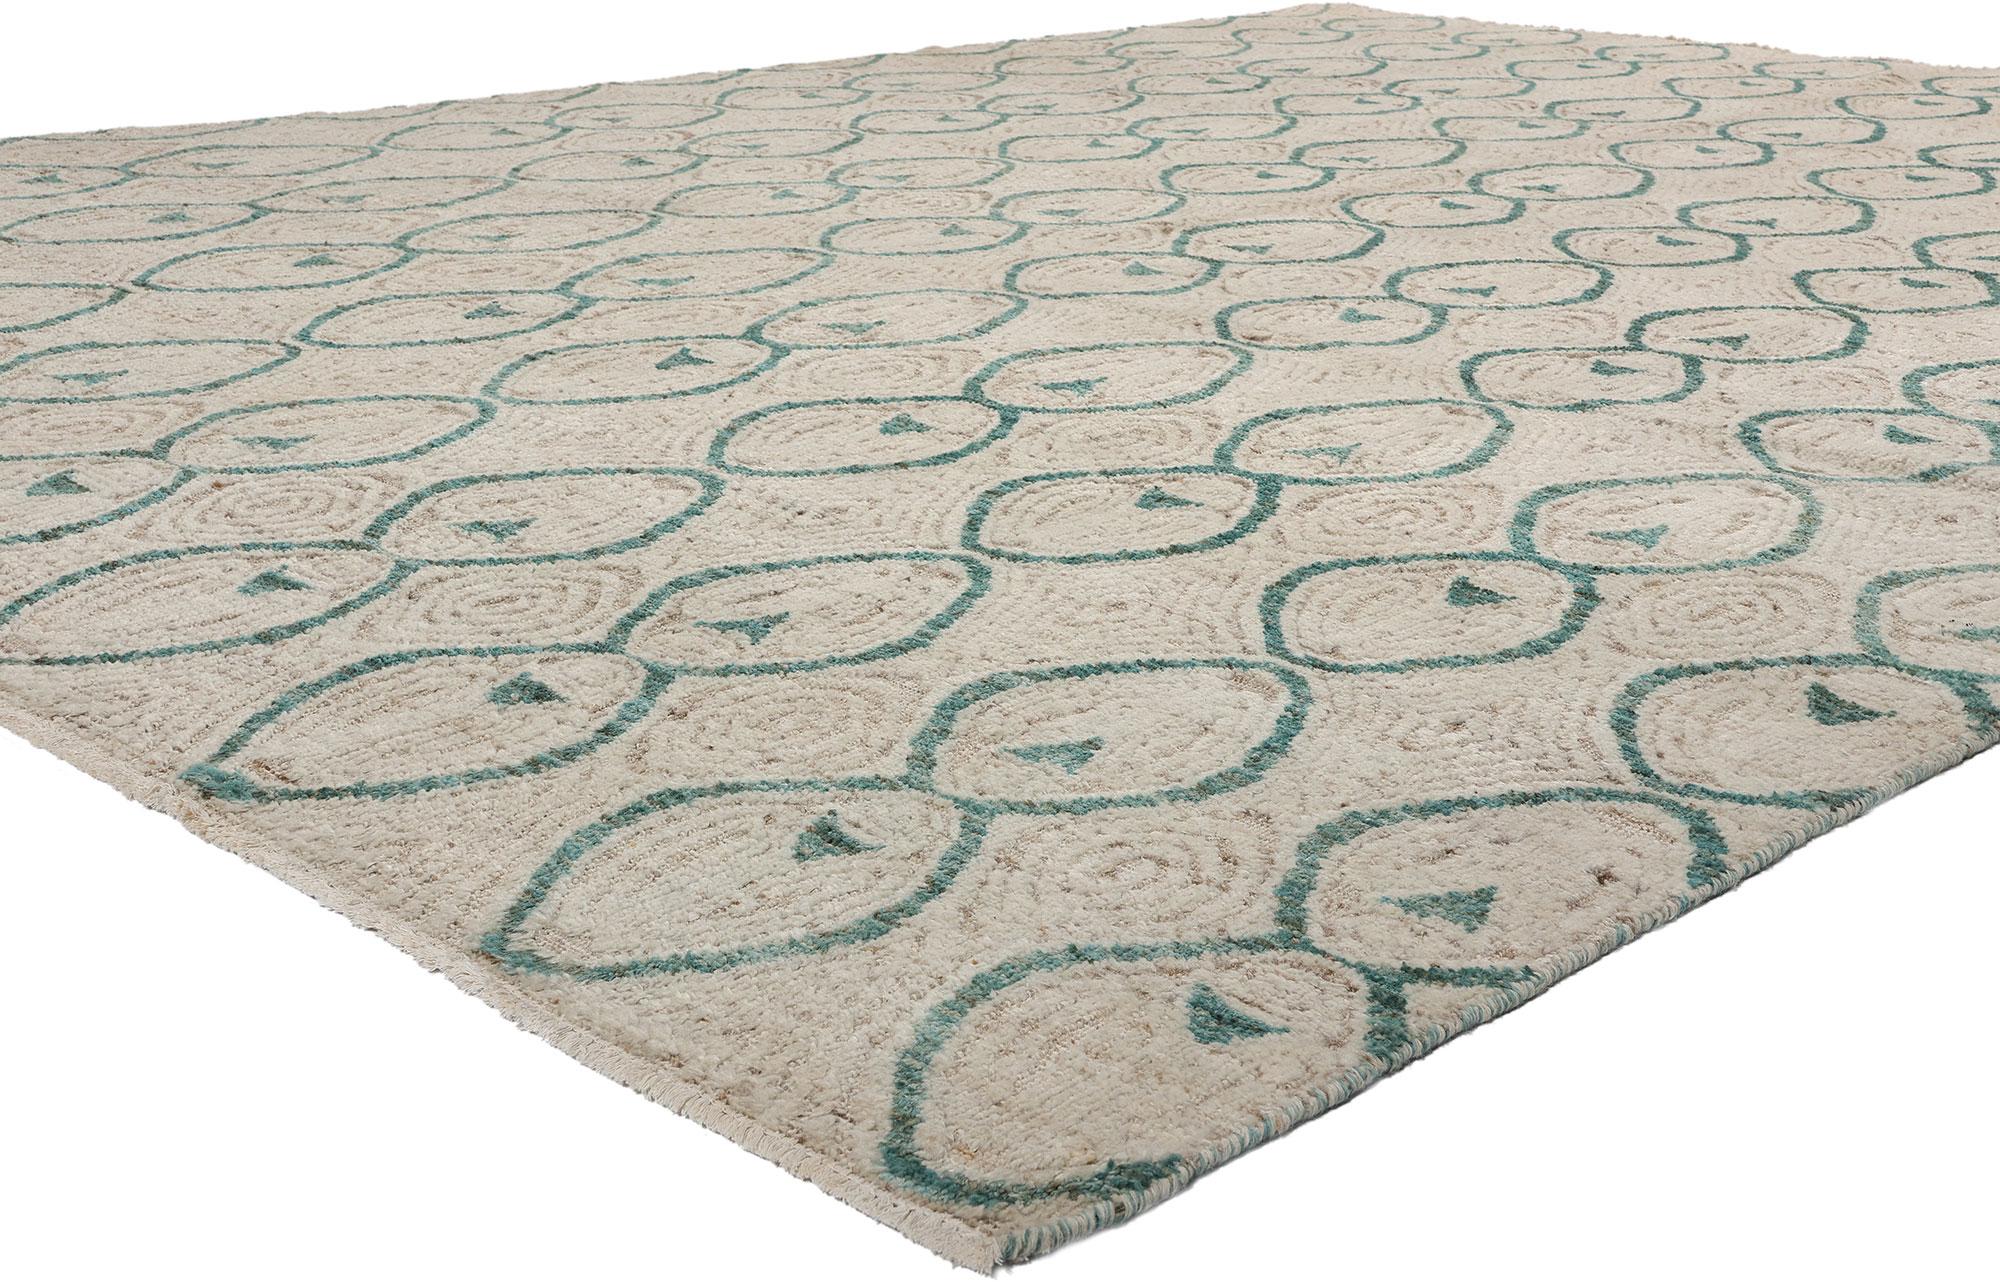 81076 Organic Modern Moroccan High-Low Rug, 08'10 x 11'09. Introducing our hand-knotted wool Organic Modern Moroccan high-low rug, a stunning embodiment of tranquil beauty inspired by the harmony of Japanese gardens and the timeless elegance of